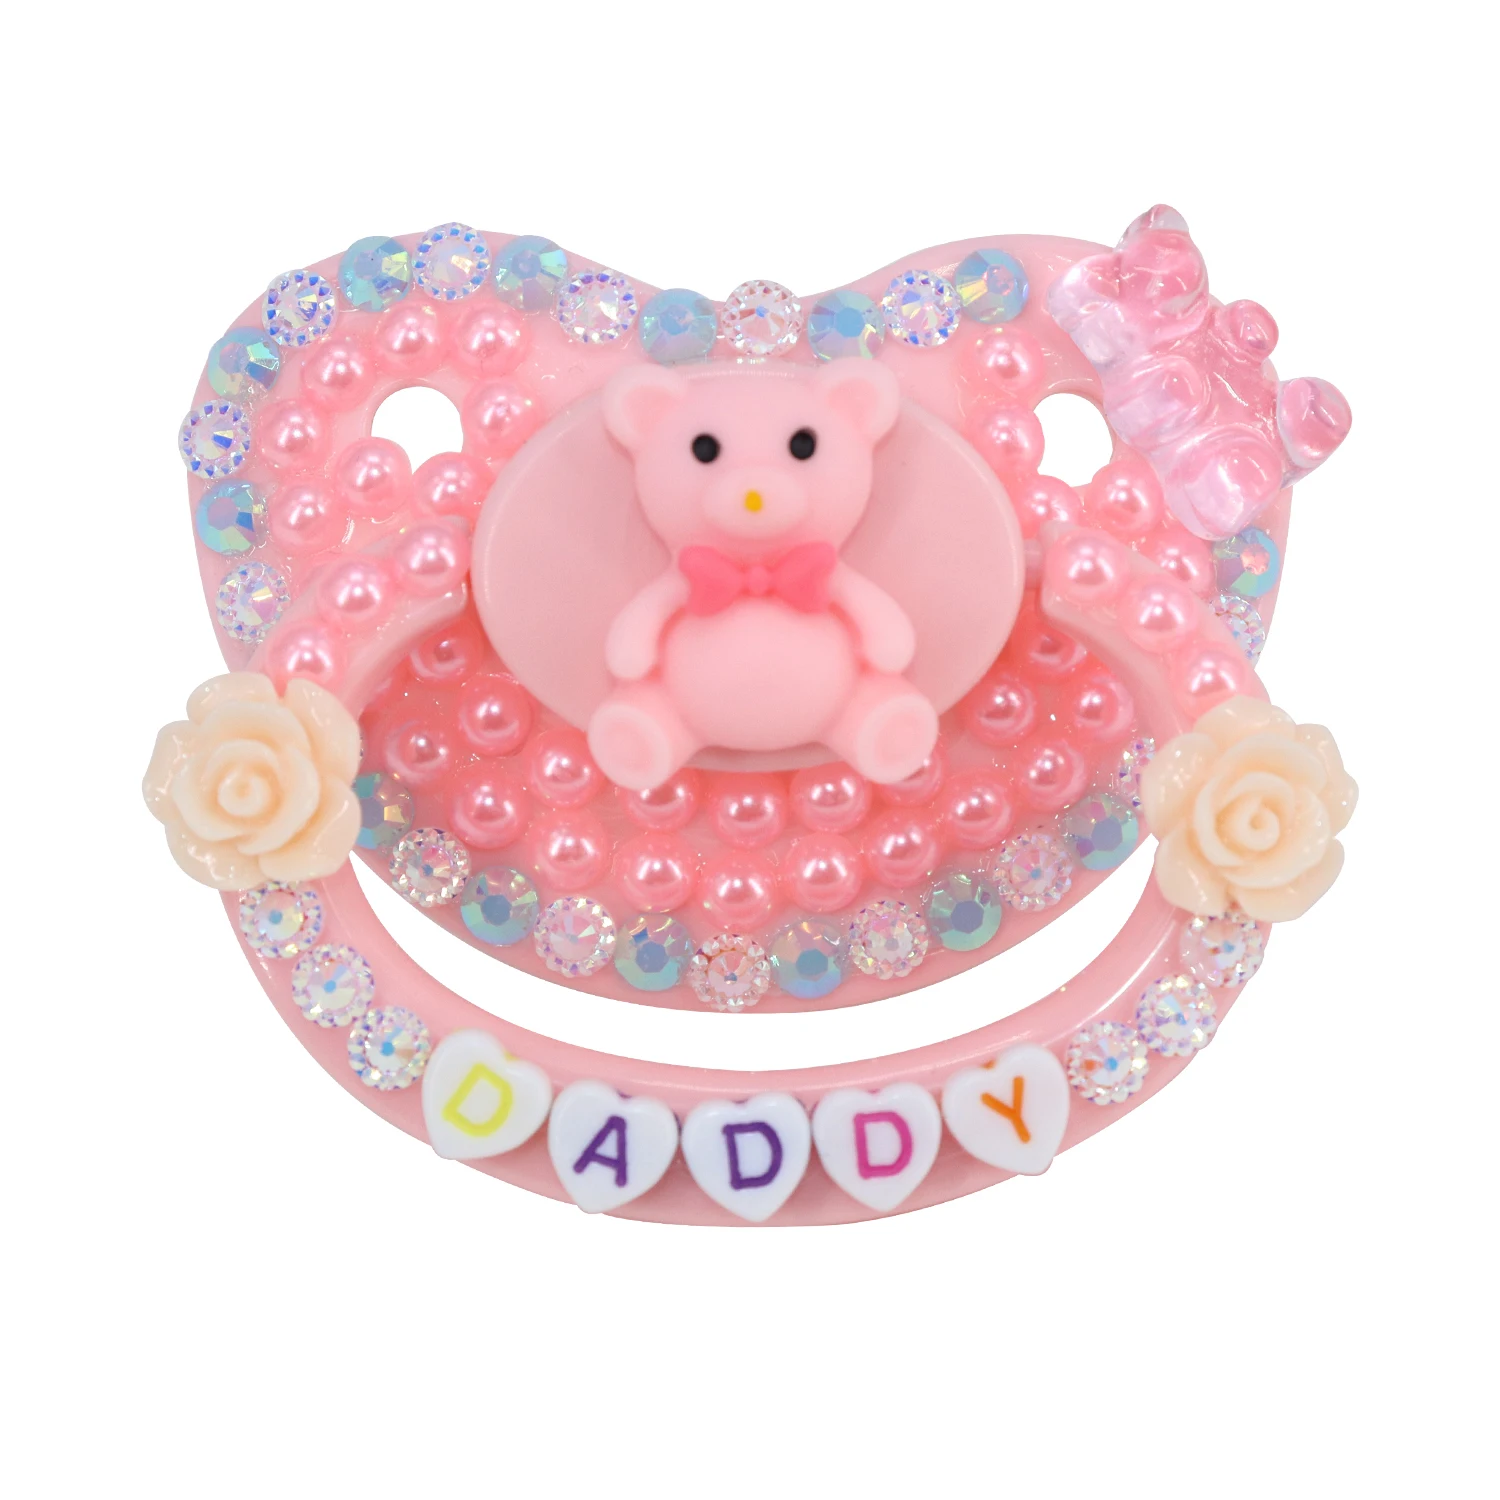 ABDL Adult Baby Size Pacifier 100% Handmake Adult Size Pacifier DDLG Cute Bear Patterns Daddy Dummy Dom Silicone BPA Free pink